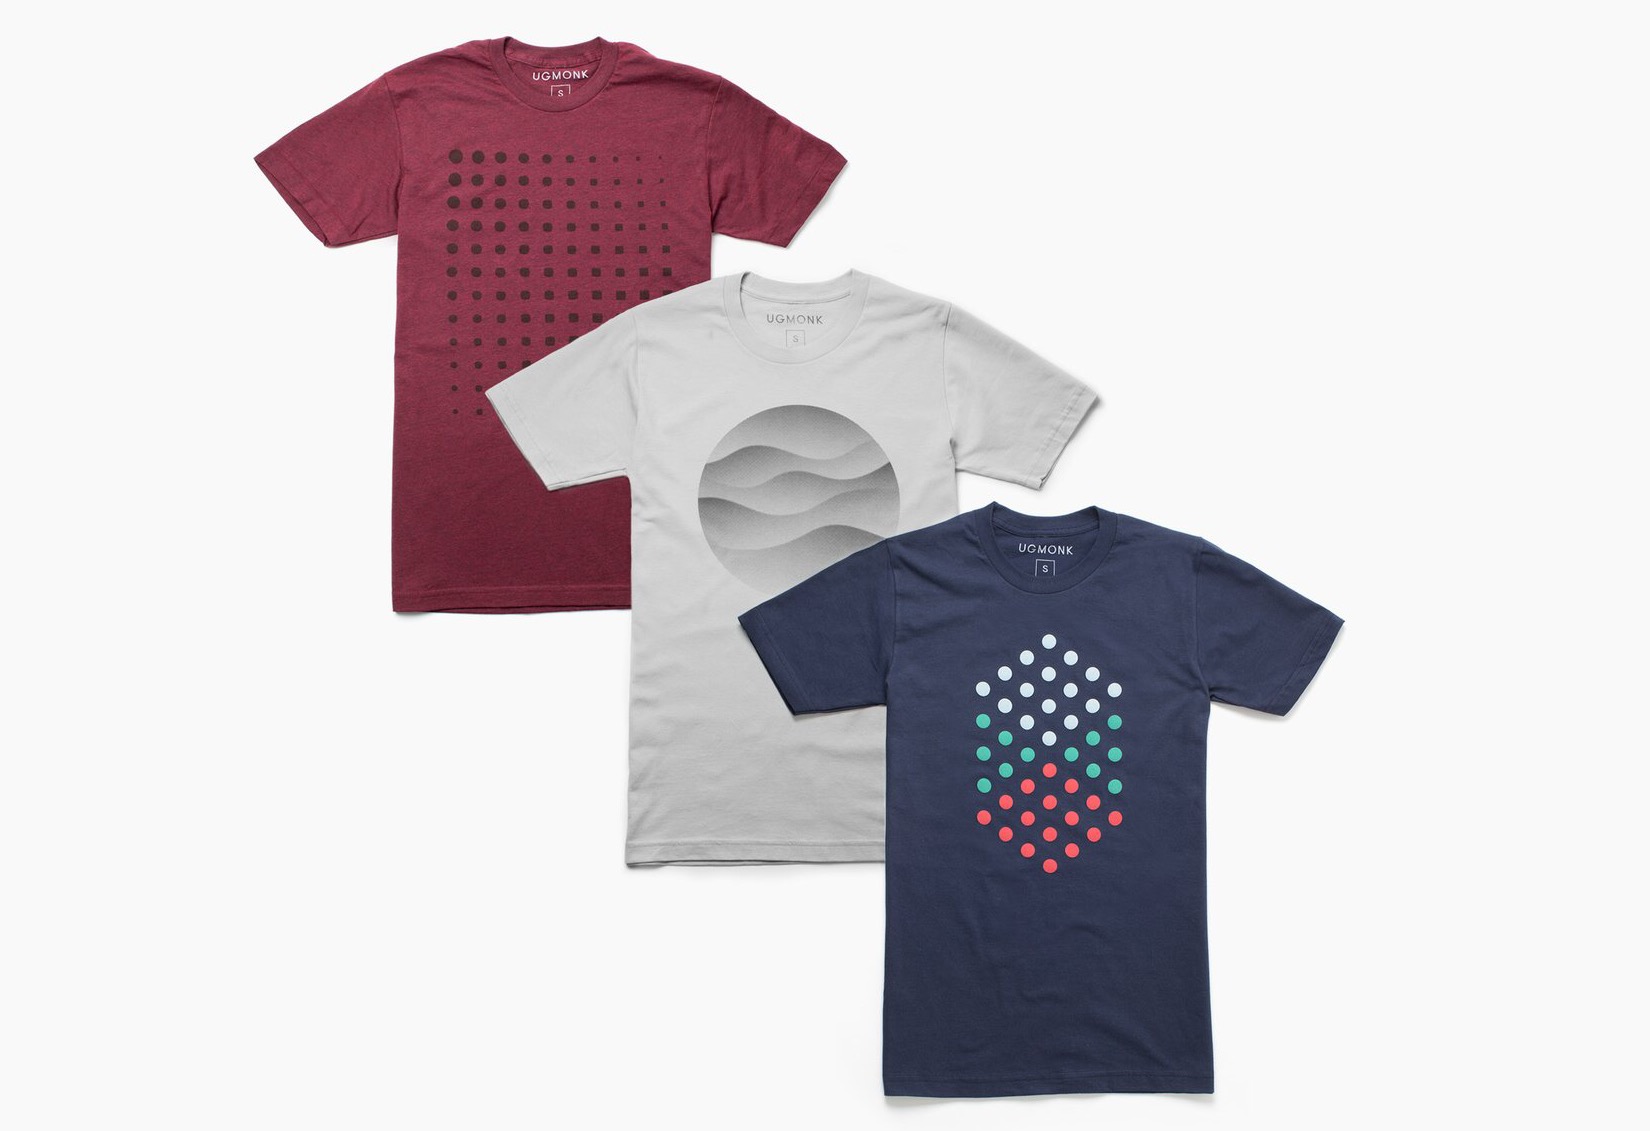 the-dot-series-three-new-tees-by-ugmonk